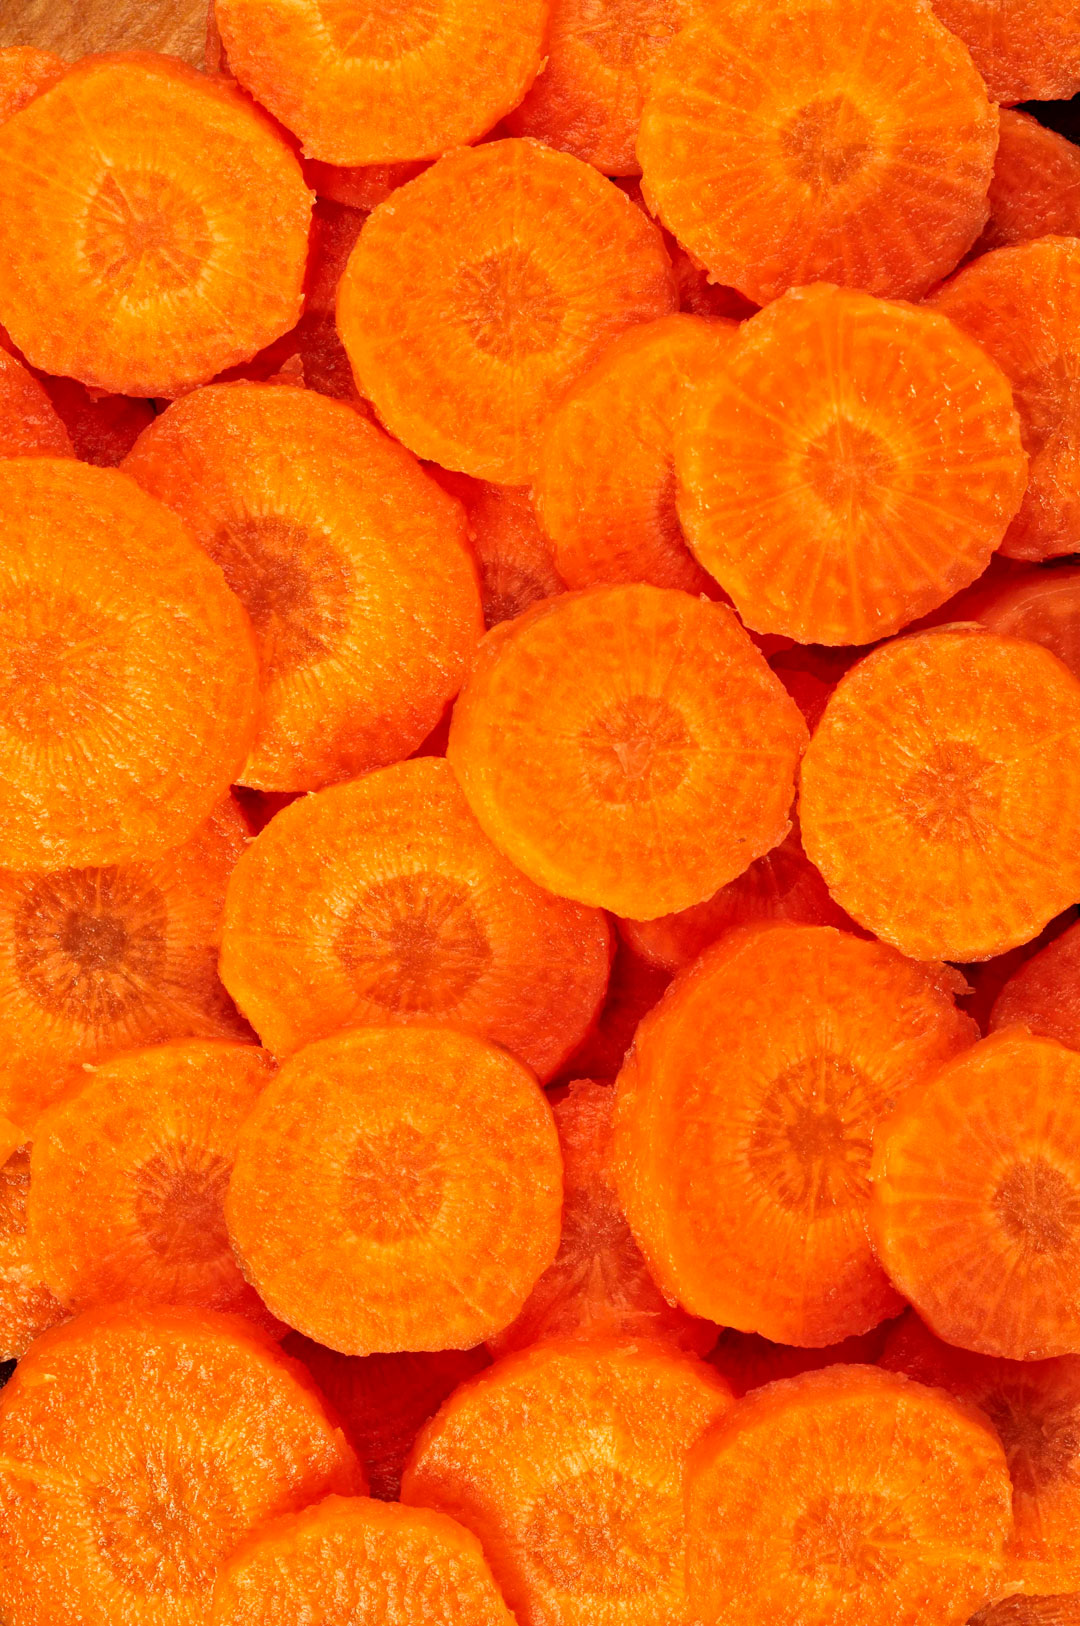 A close-up image of numerous carrot slices, showing their vibrant orange color. The slices are evenly cut and some have visible core rings in the center, creating a textured and layered appearance.